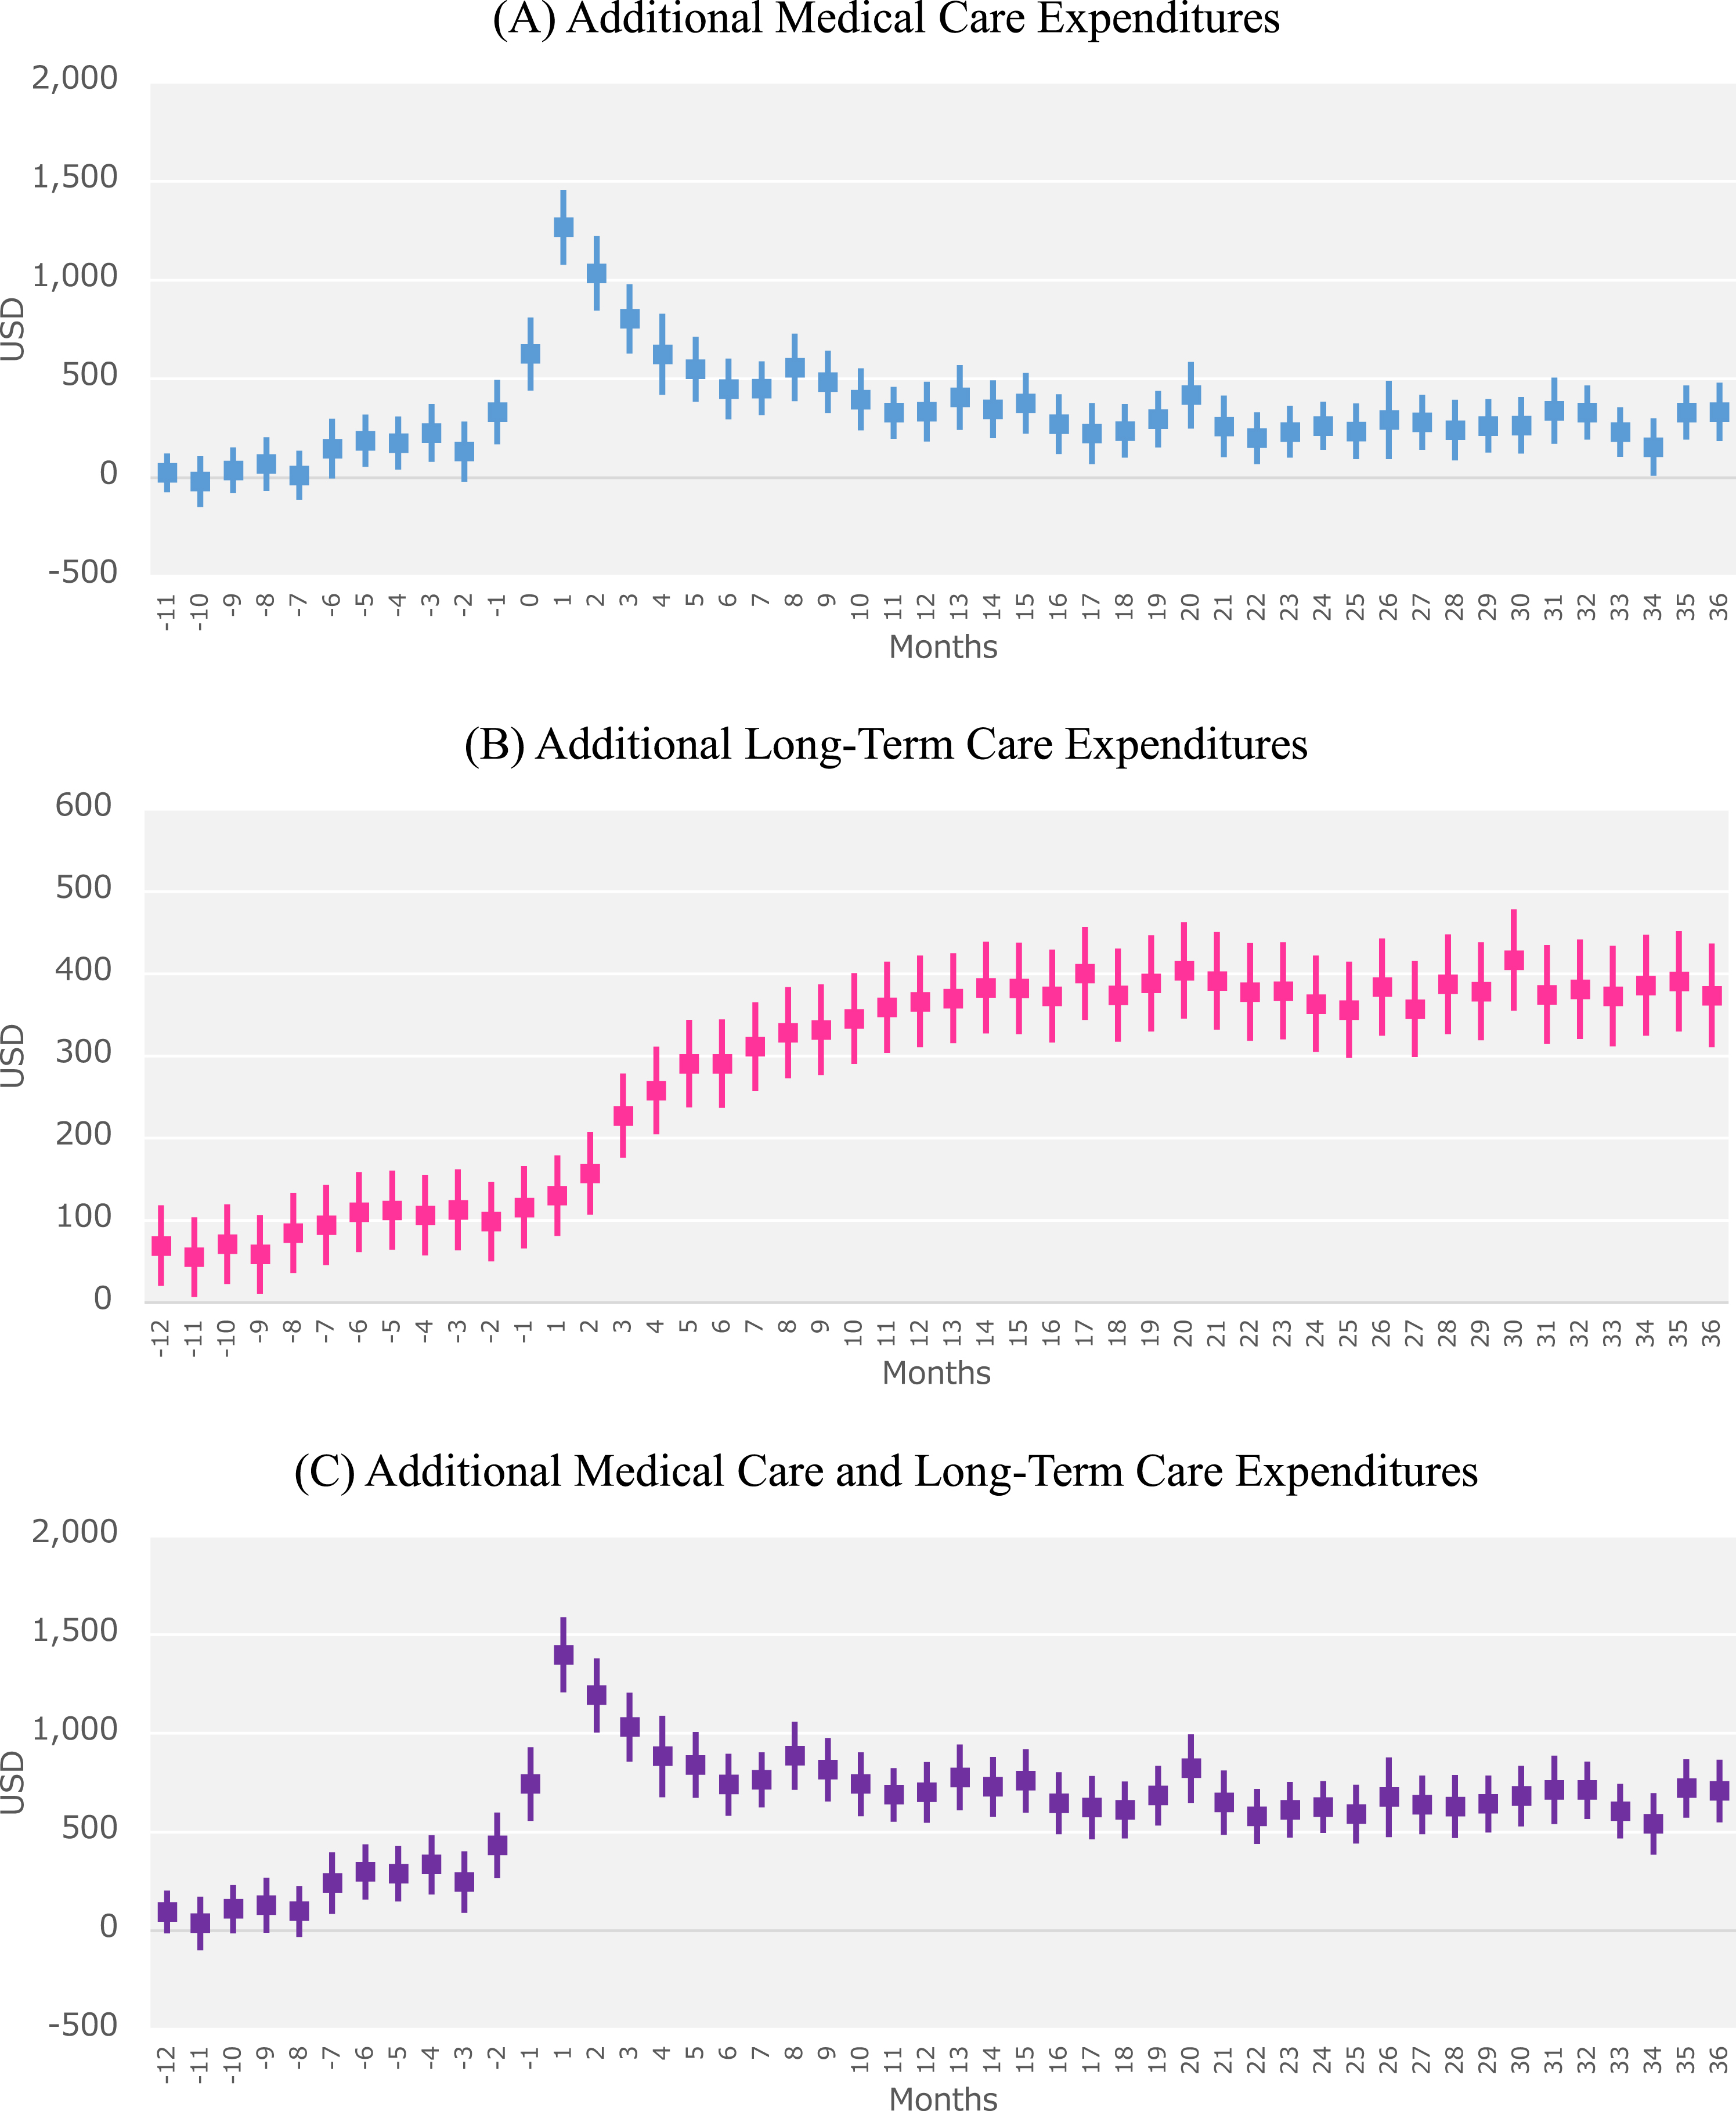 Trends in monthly additional expenditures attributable to Alzheimer’s disease (AD) in AD patients. The graphs show the monthly additional (A) medical care expenditures, (B) long-term care expenditures, and (C) medical care and long-term care expenditures in AD patients from 12 months before and 36 months after the index month. Month 1 indicates the index month in which an AD patient was newly diagnosed with AD.